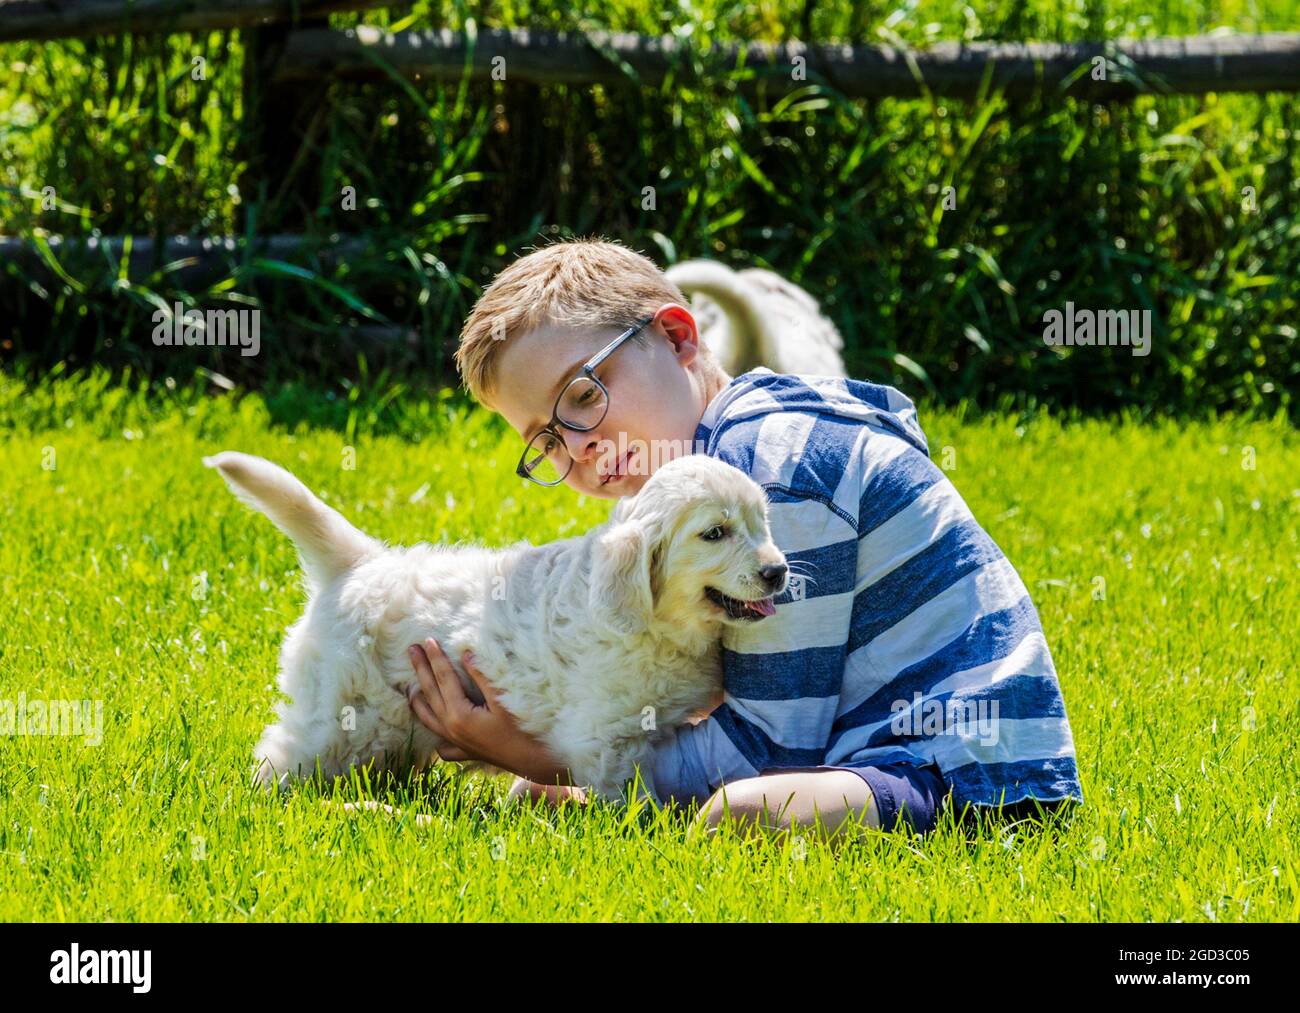 Young boy playing on grass with six week old Platinum, or Cream colored Golden Retriever puppies. Stock Photo